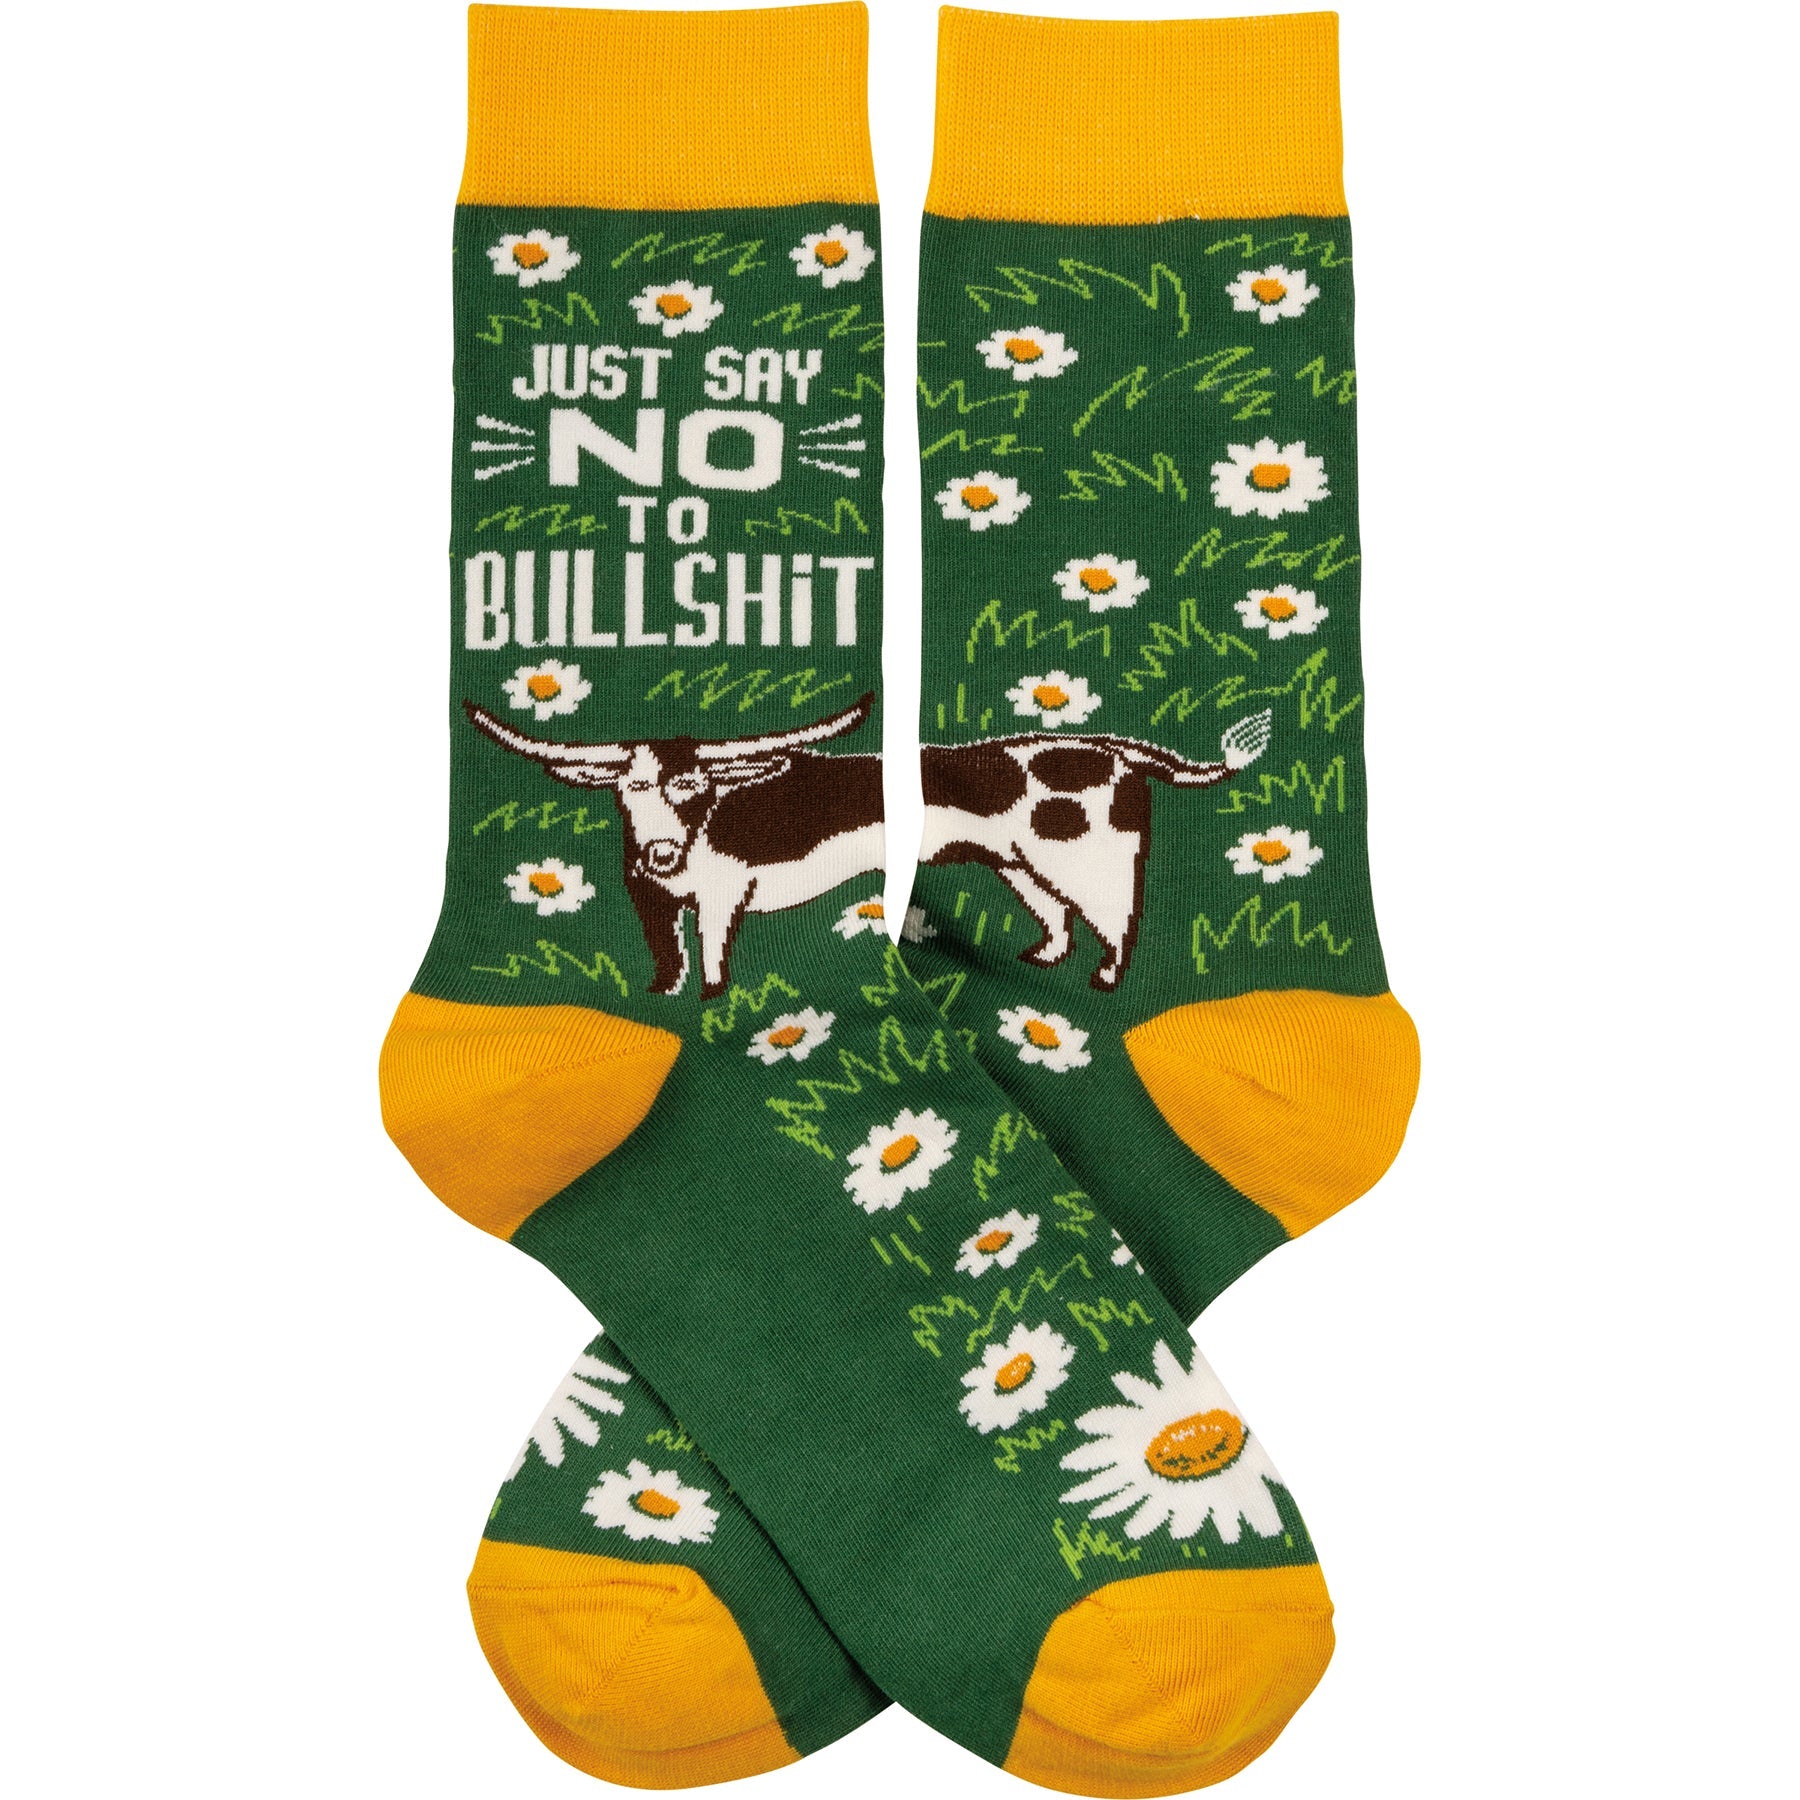 Just Say No To Bullshit Funny Socks in Green and Yellow | Unisex